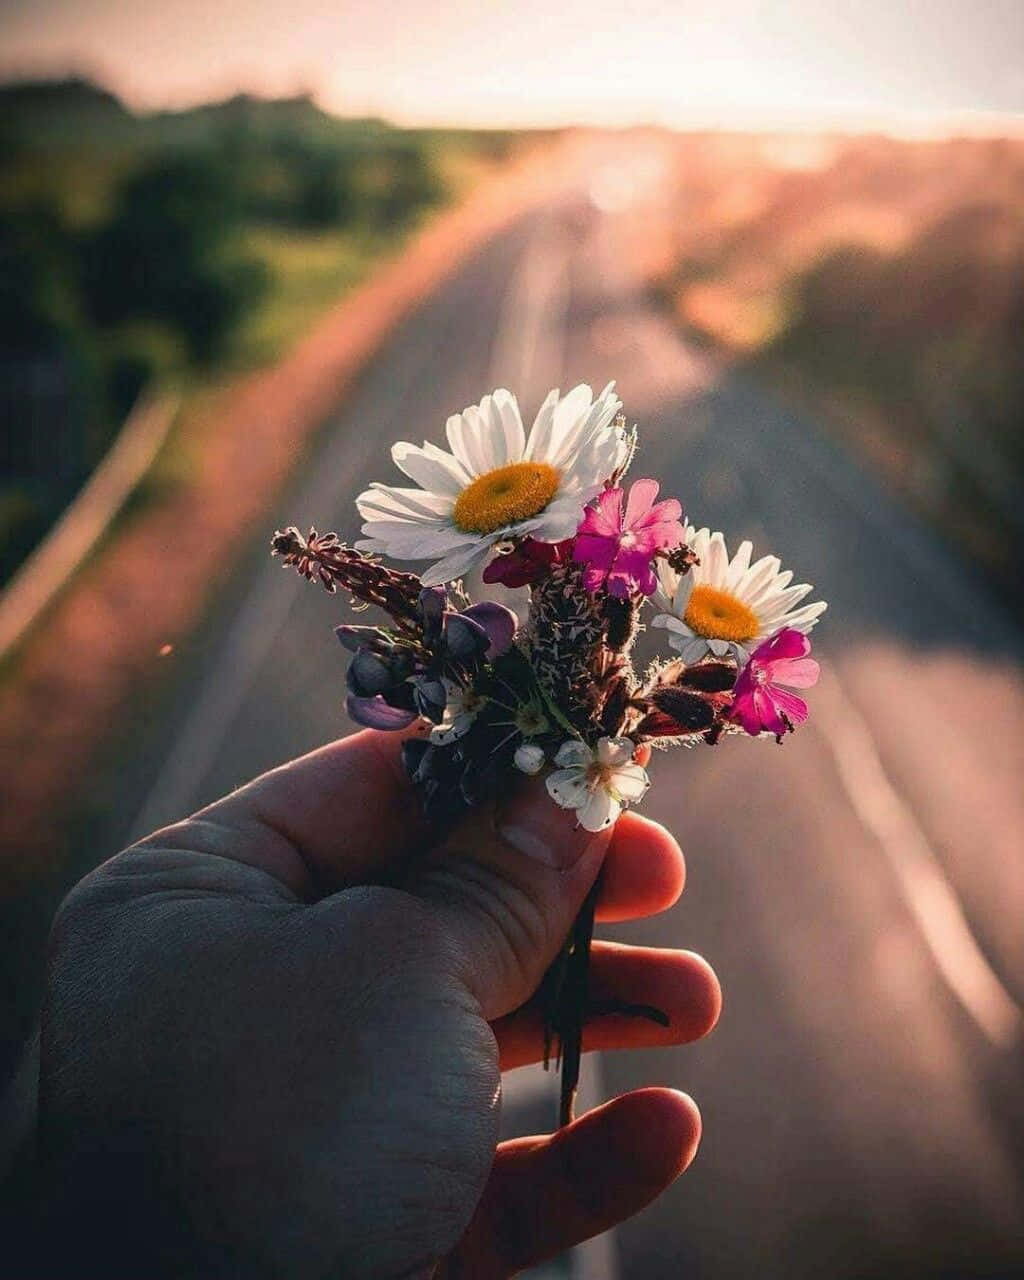 A Hand Holding Flowers On A Road